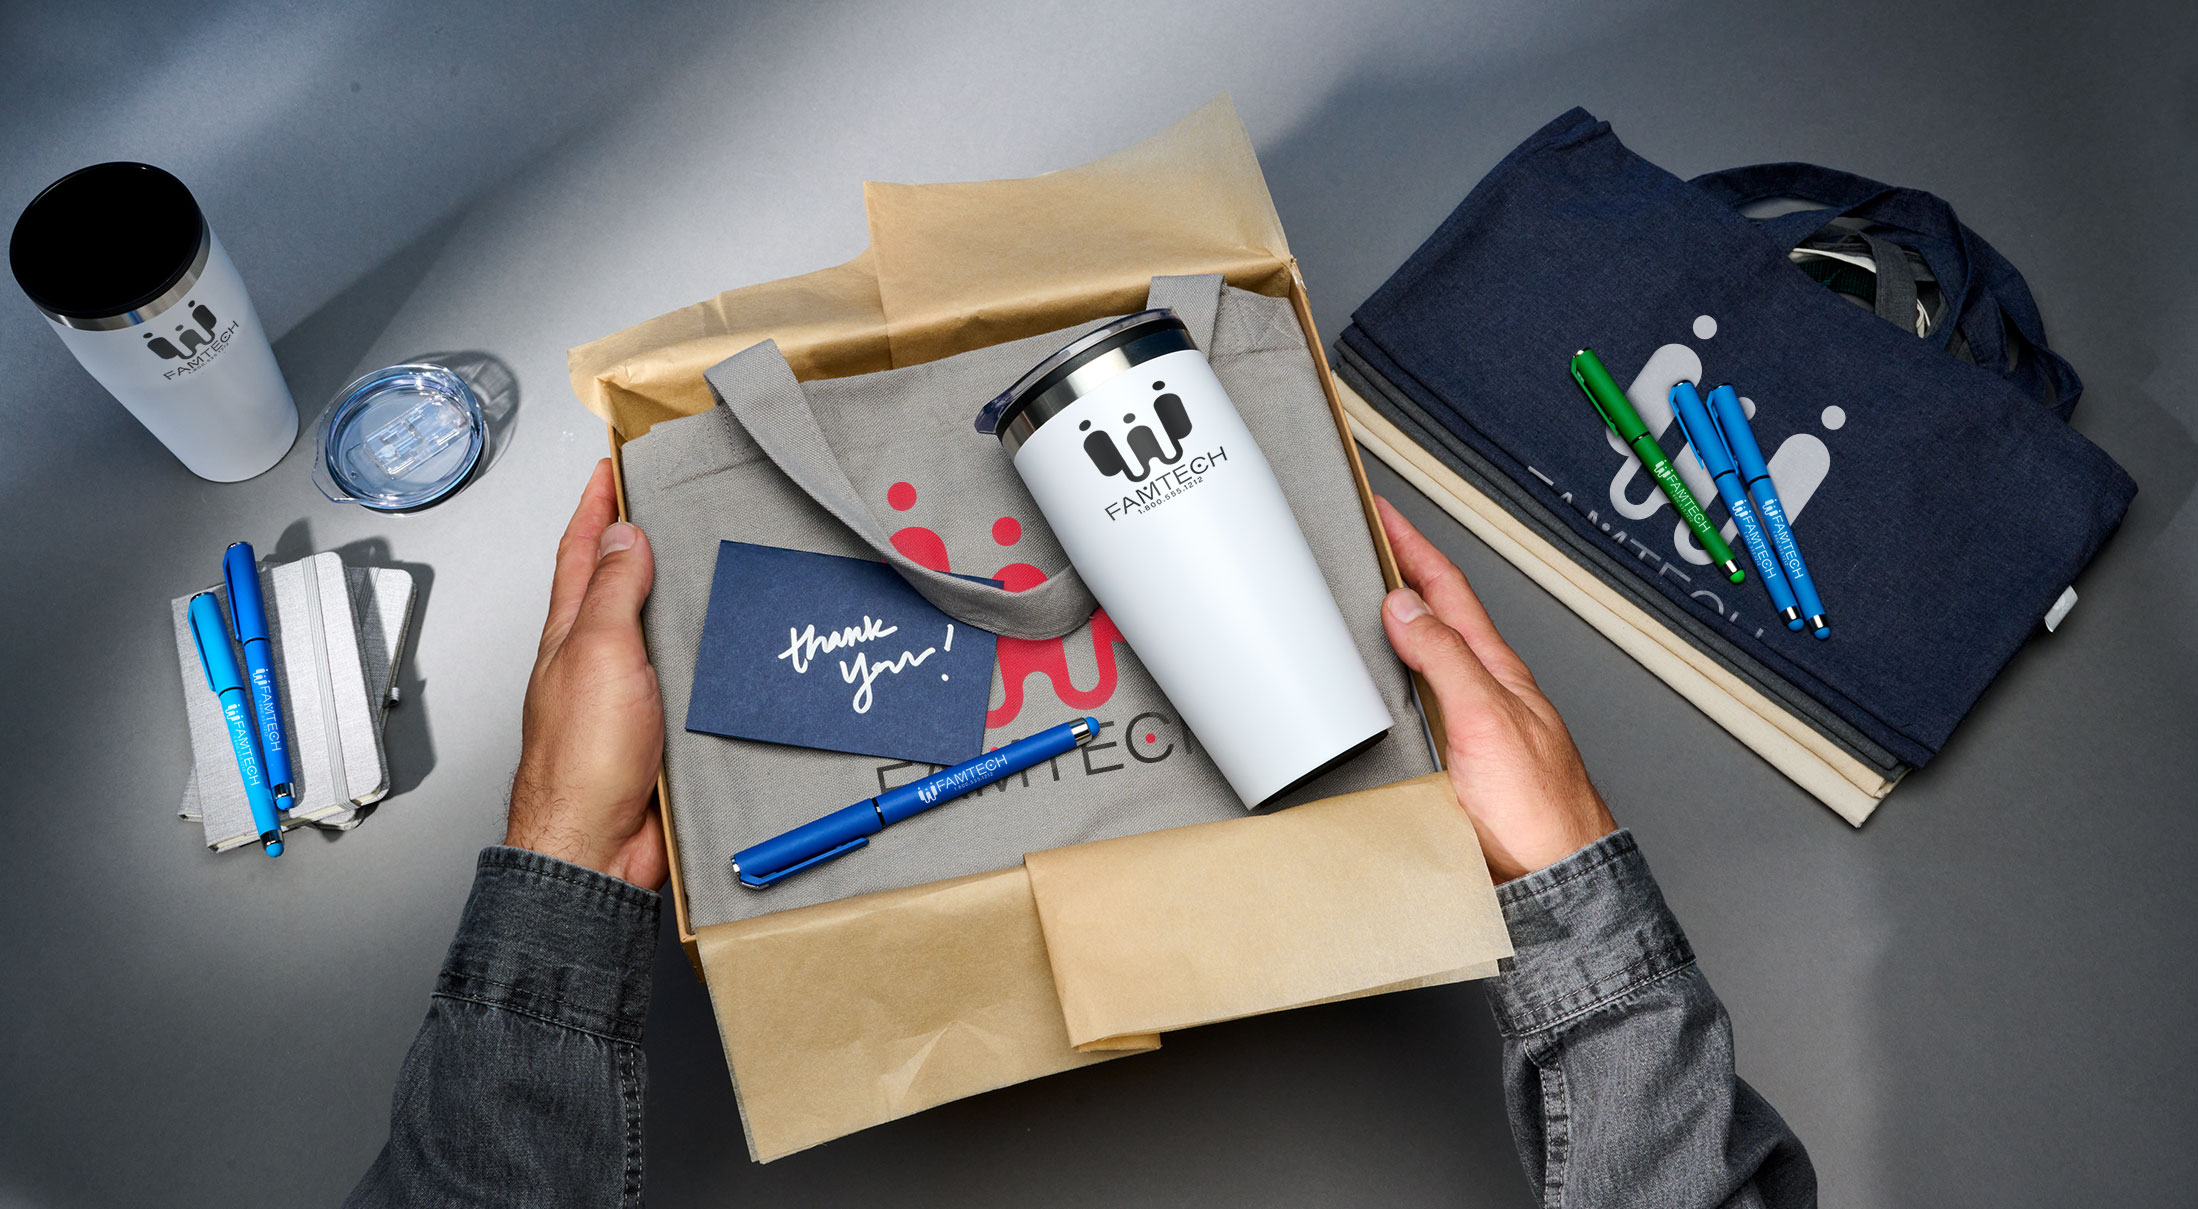 Personalized employee gifts including pens, tumblers, and stationery